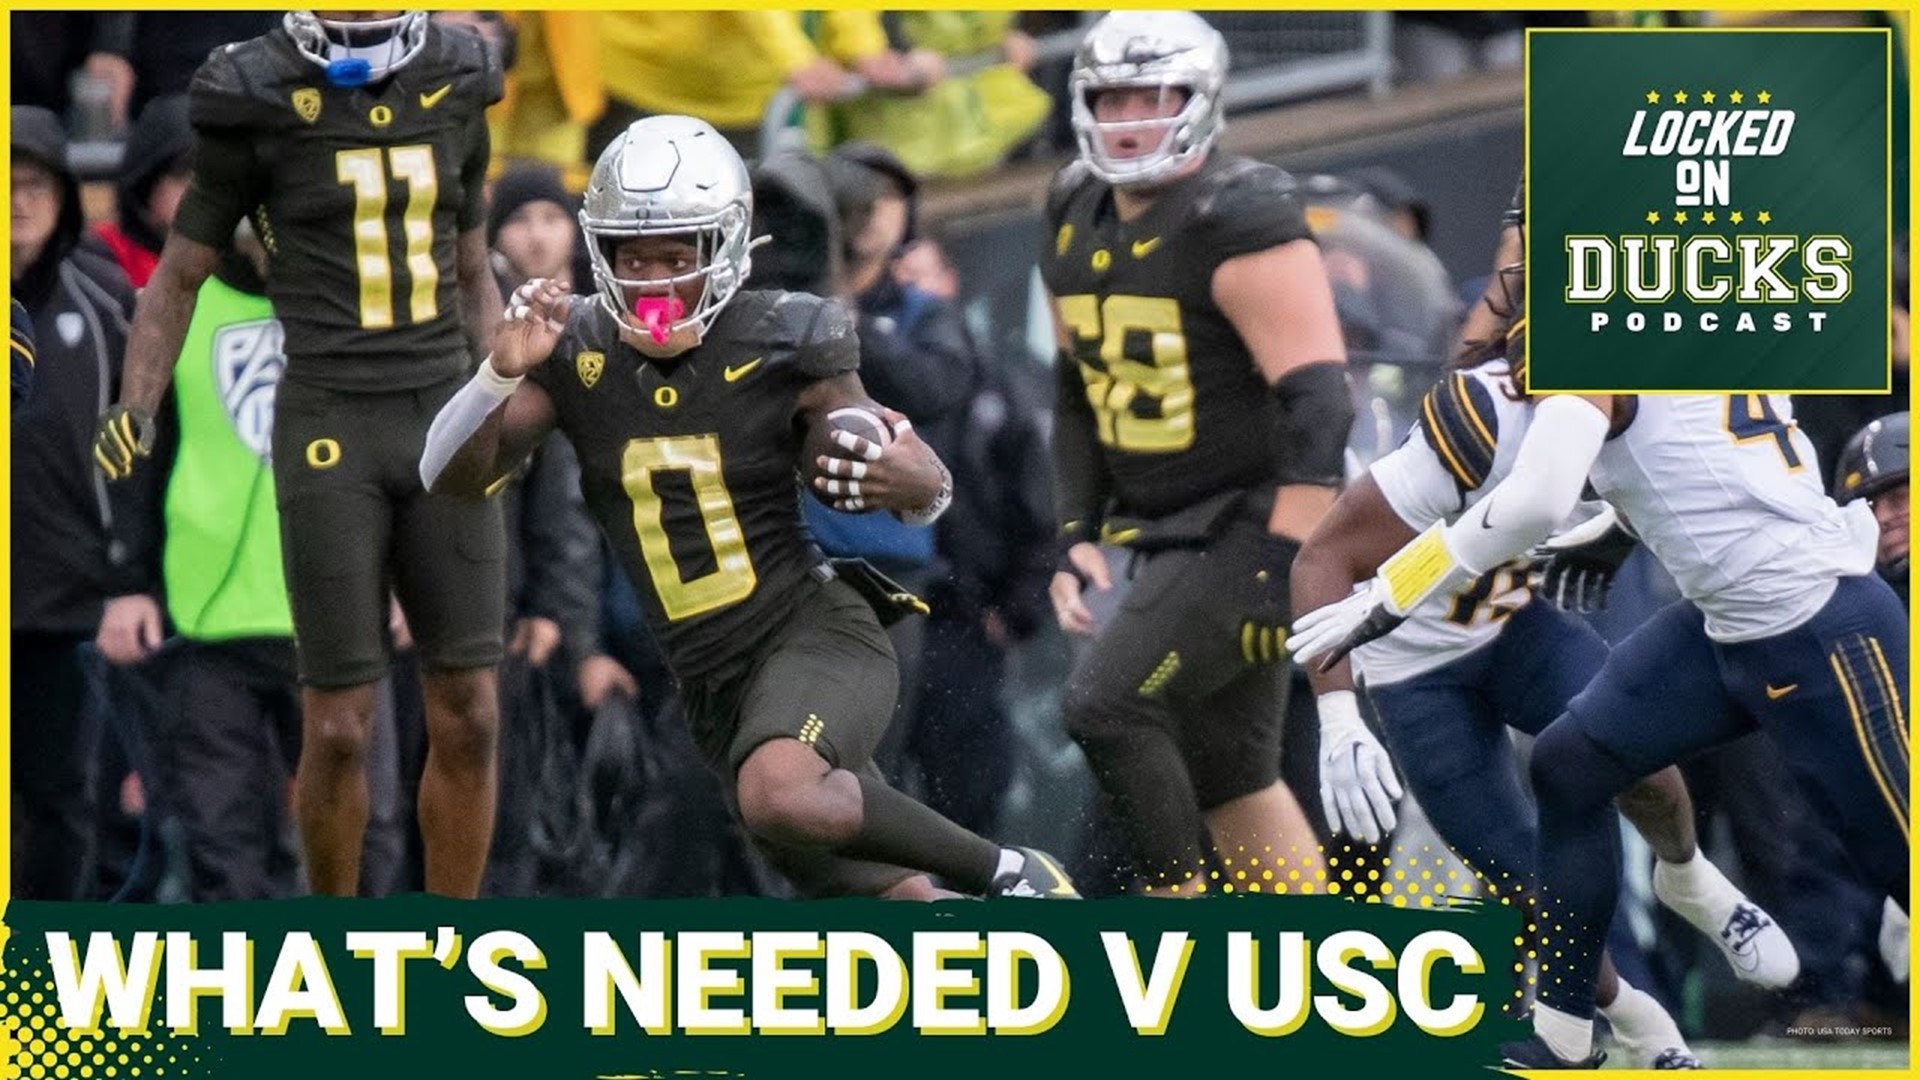 The Trojans enter this week's matchup with 3 losses and have fallen out of the top 25, but that doesn't lessen the importance for the Ducks.